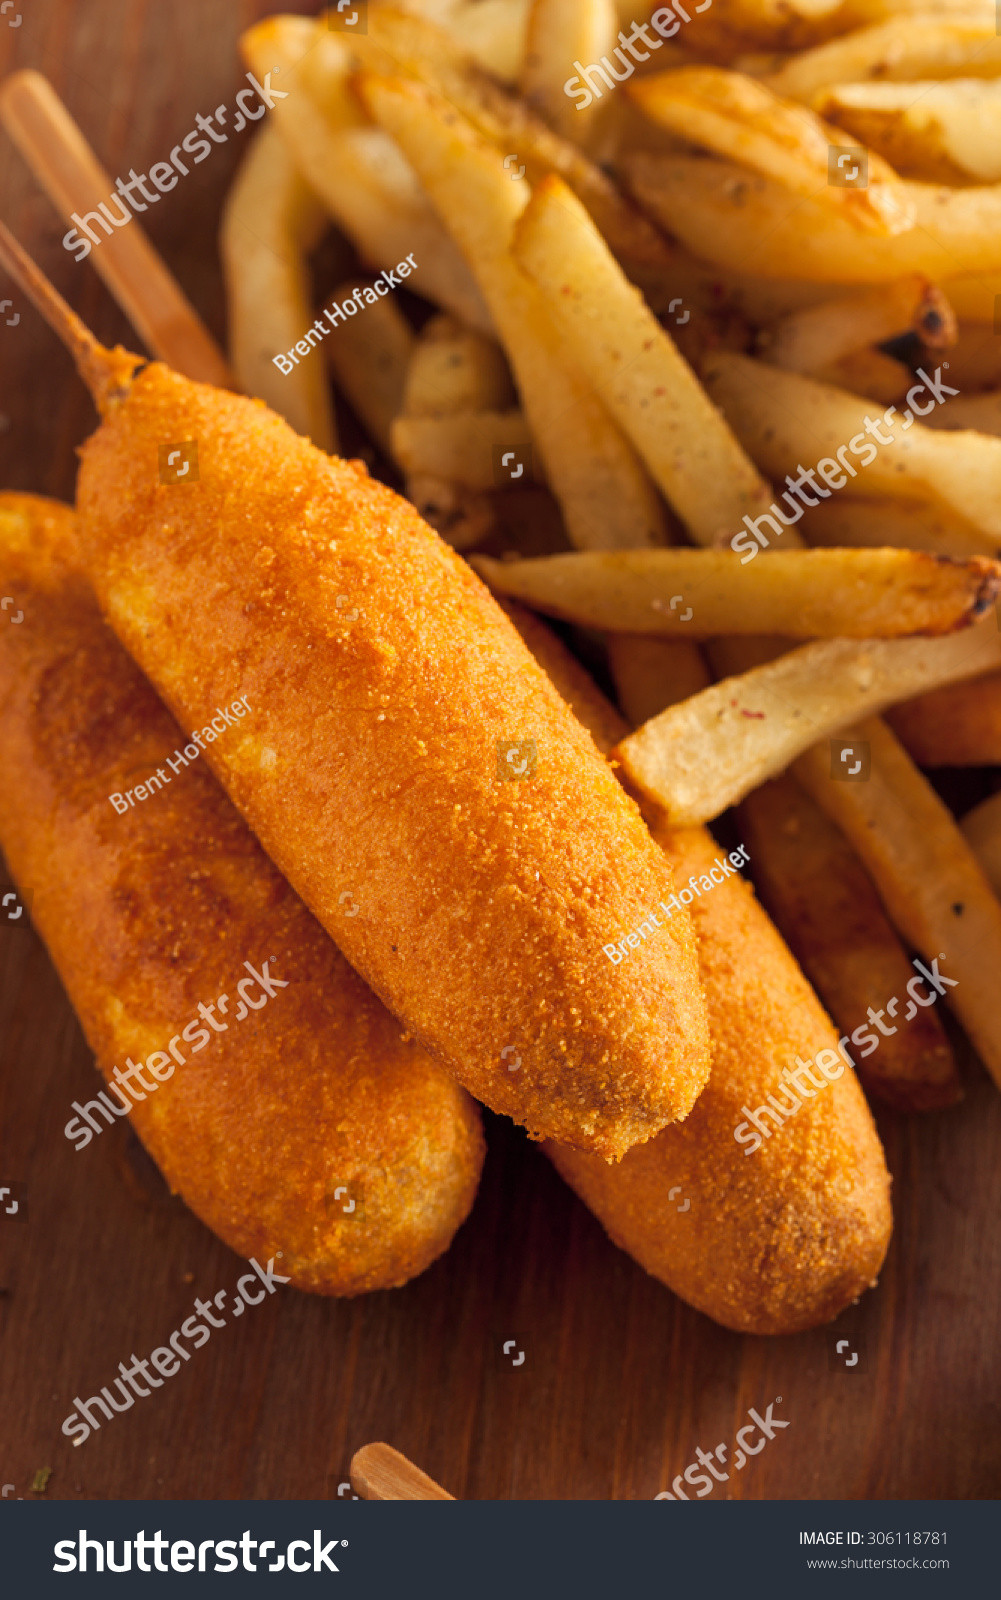 Organic Corn Dogs
 Homemade Organic Corn Dogs With Fries And Ketchup Stock